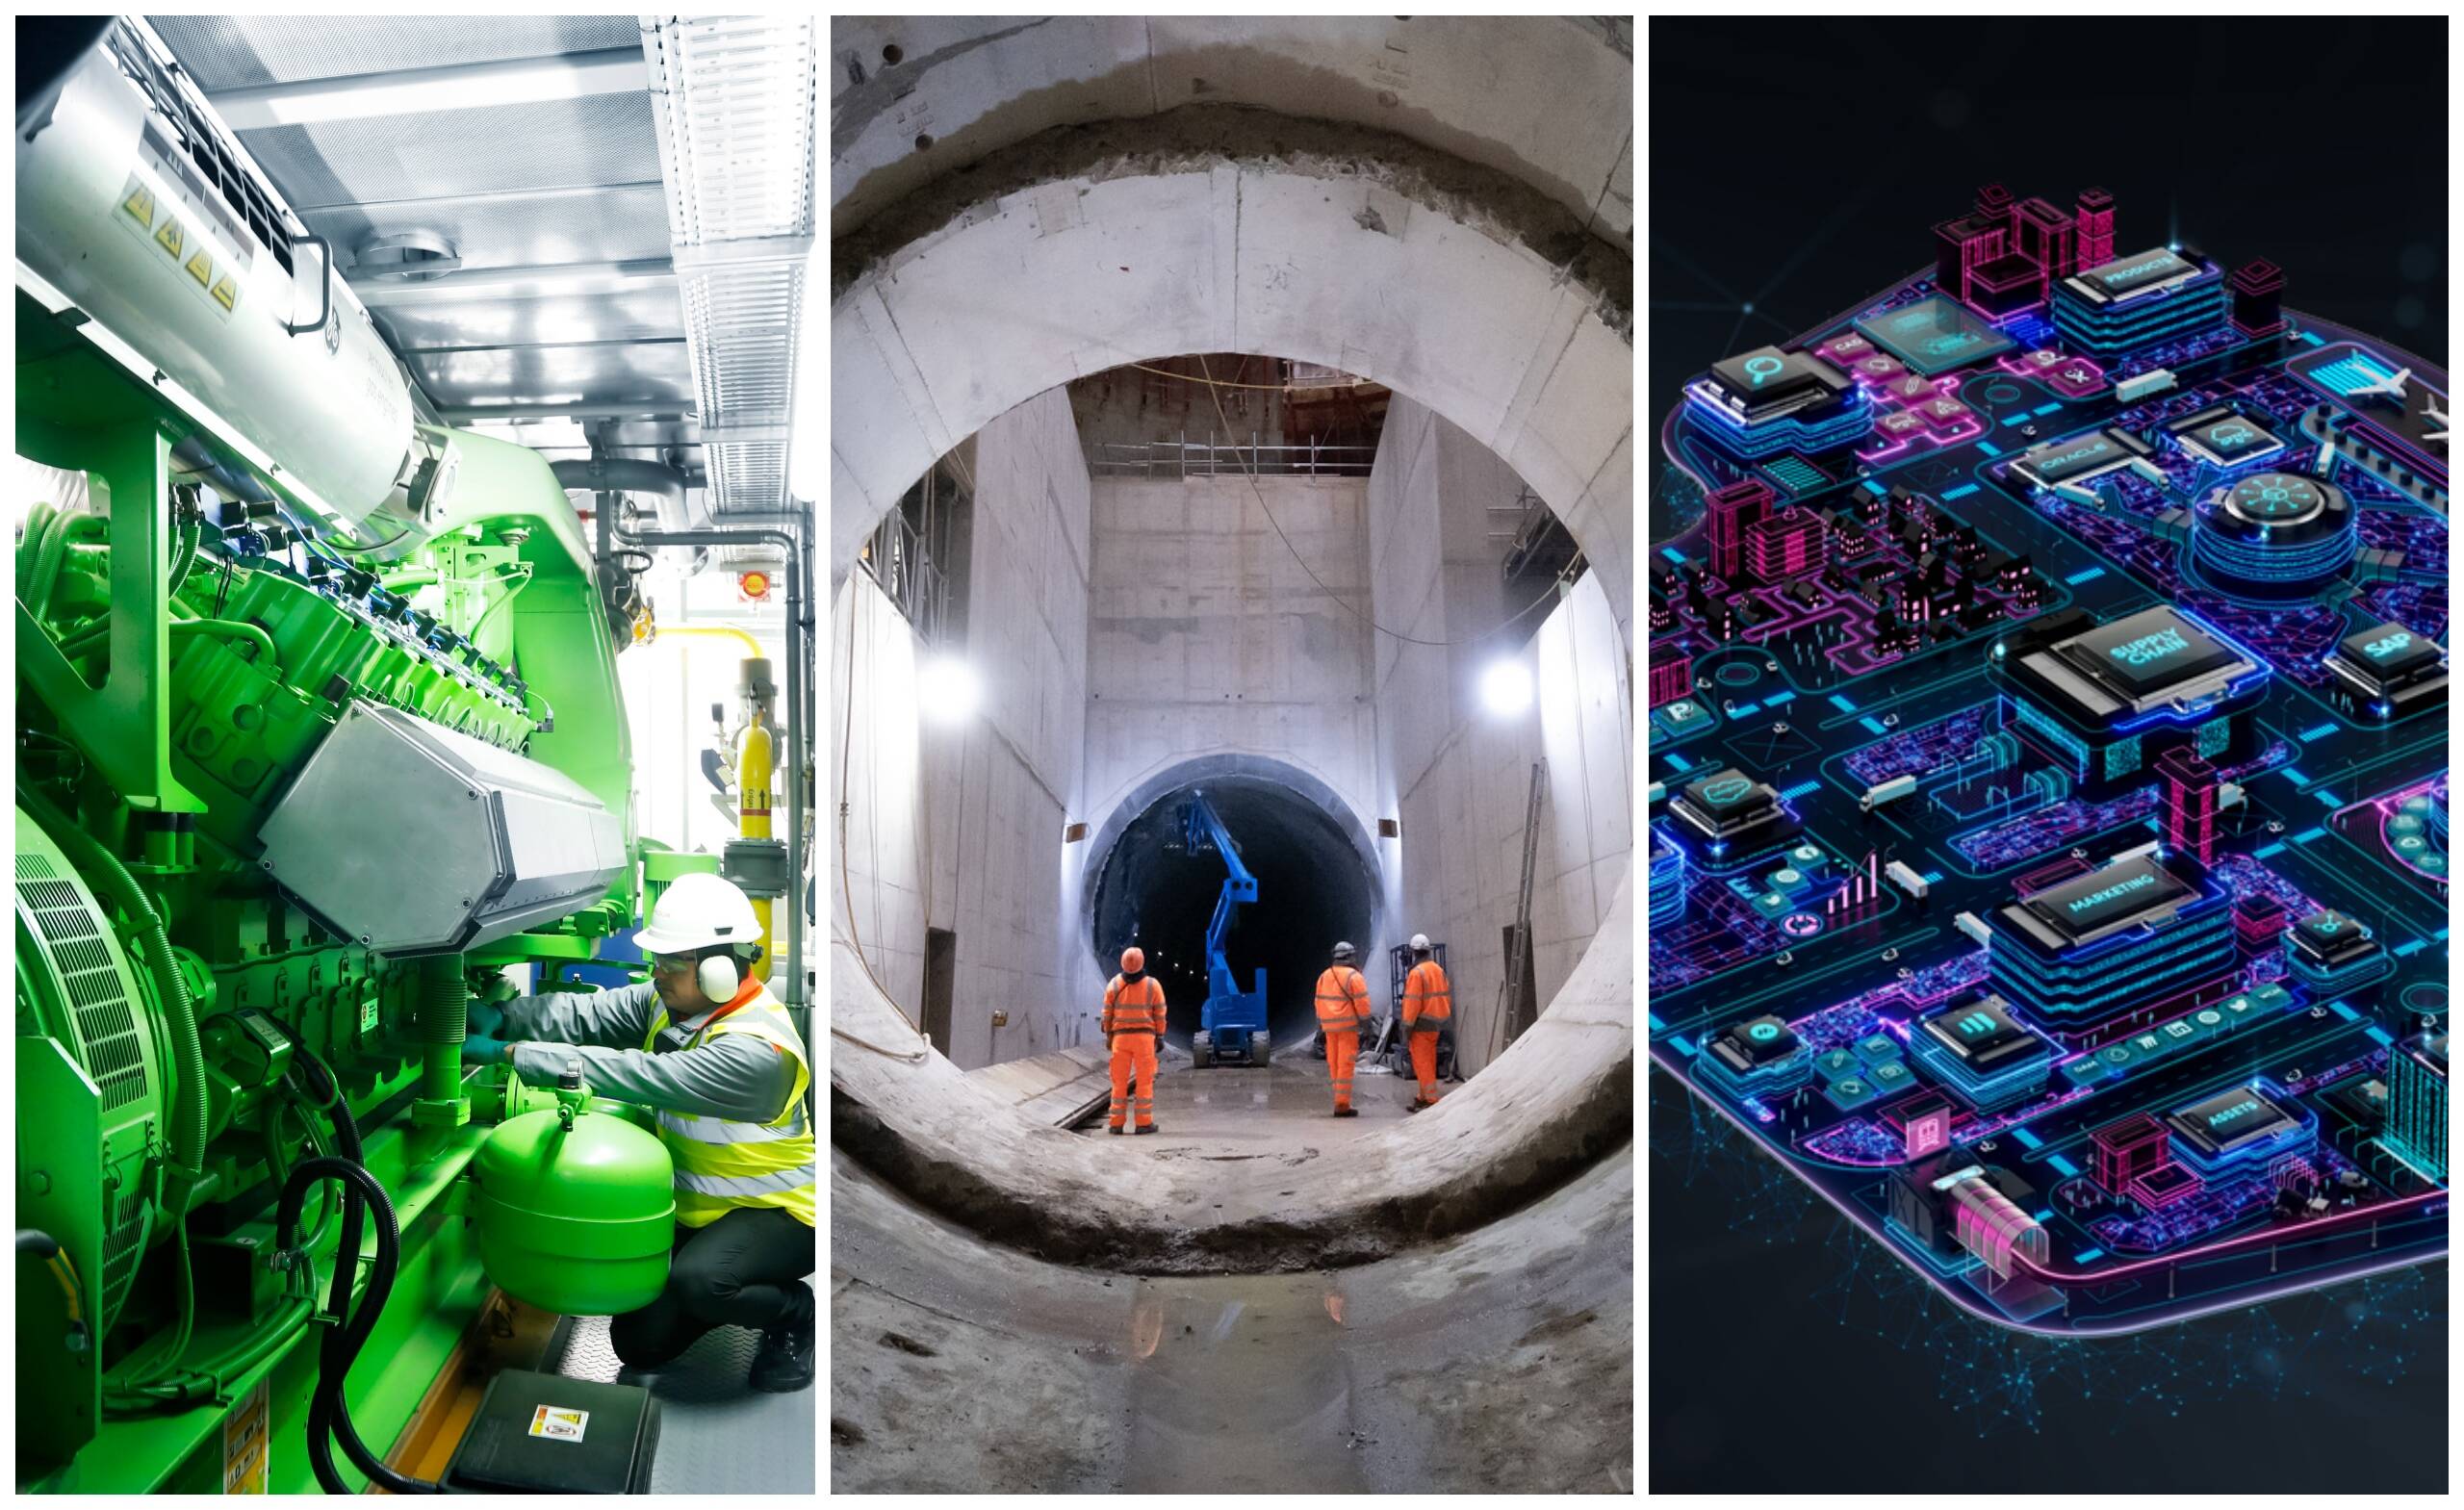 Innovation round-up: Customer experience digital twin, Humber ‘hydrogen town’, ‘super sewer’ makes Blackfriars connection